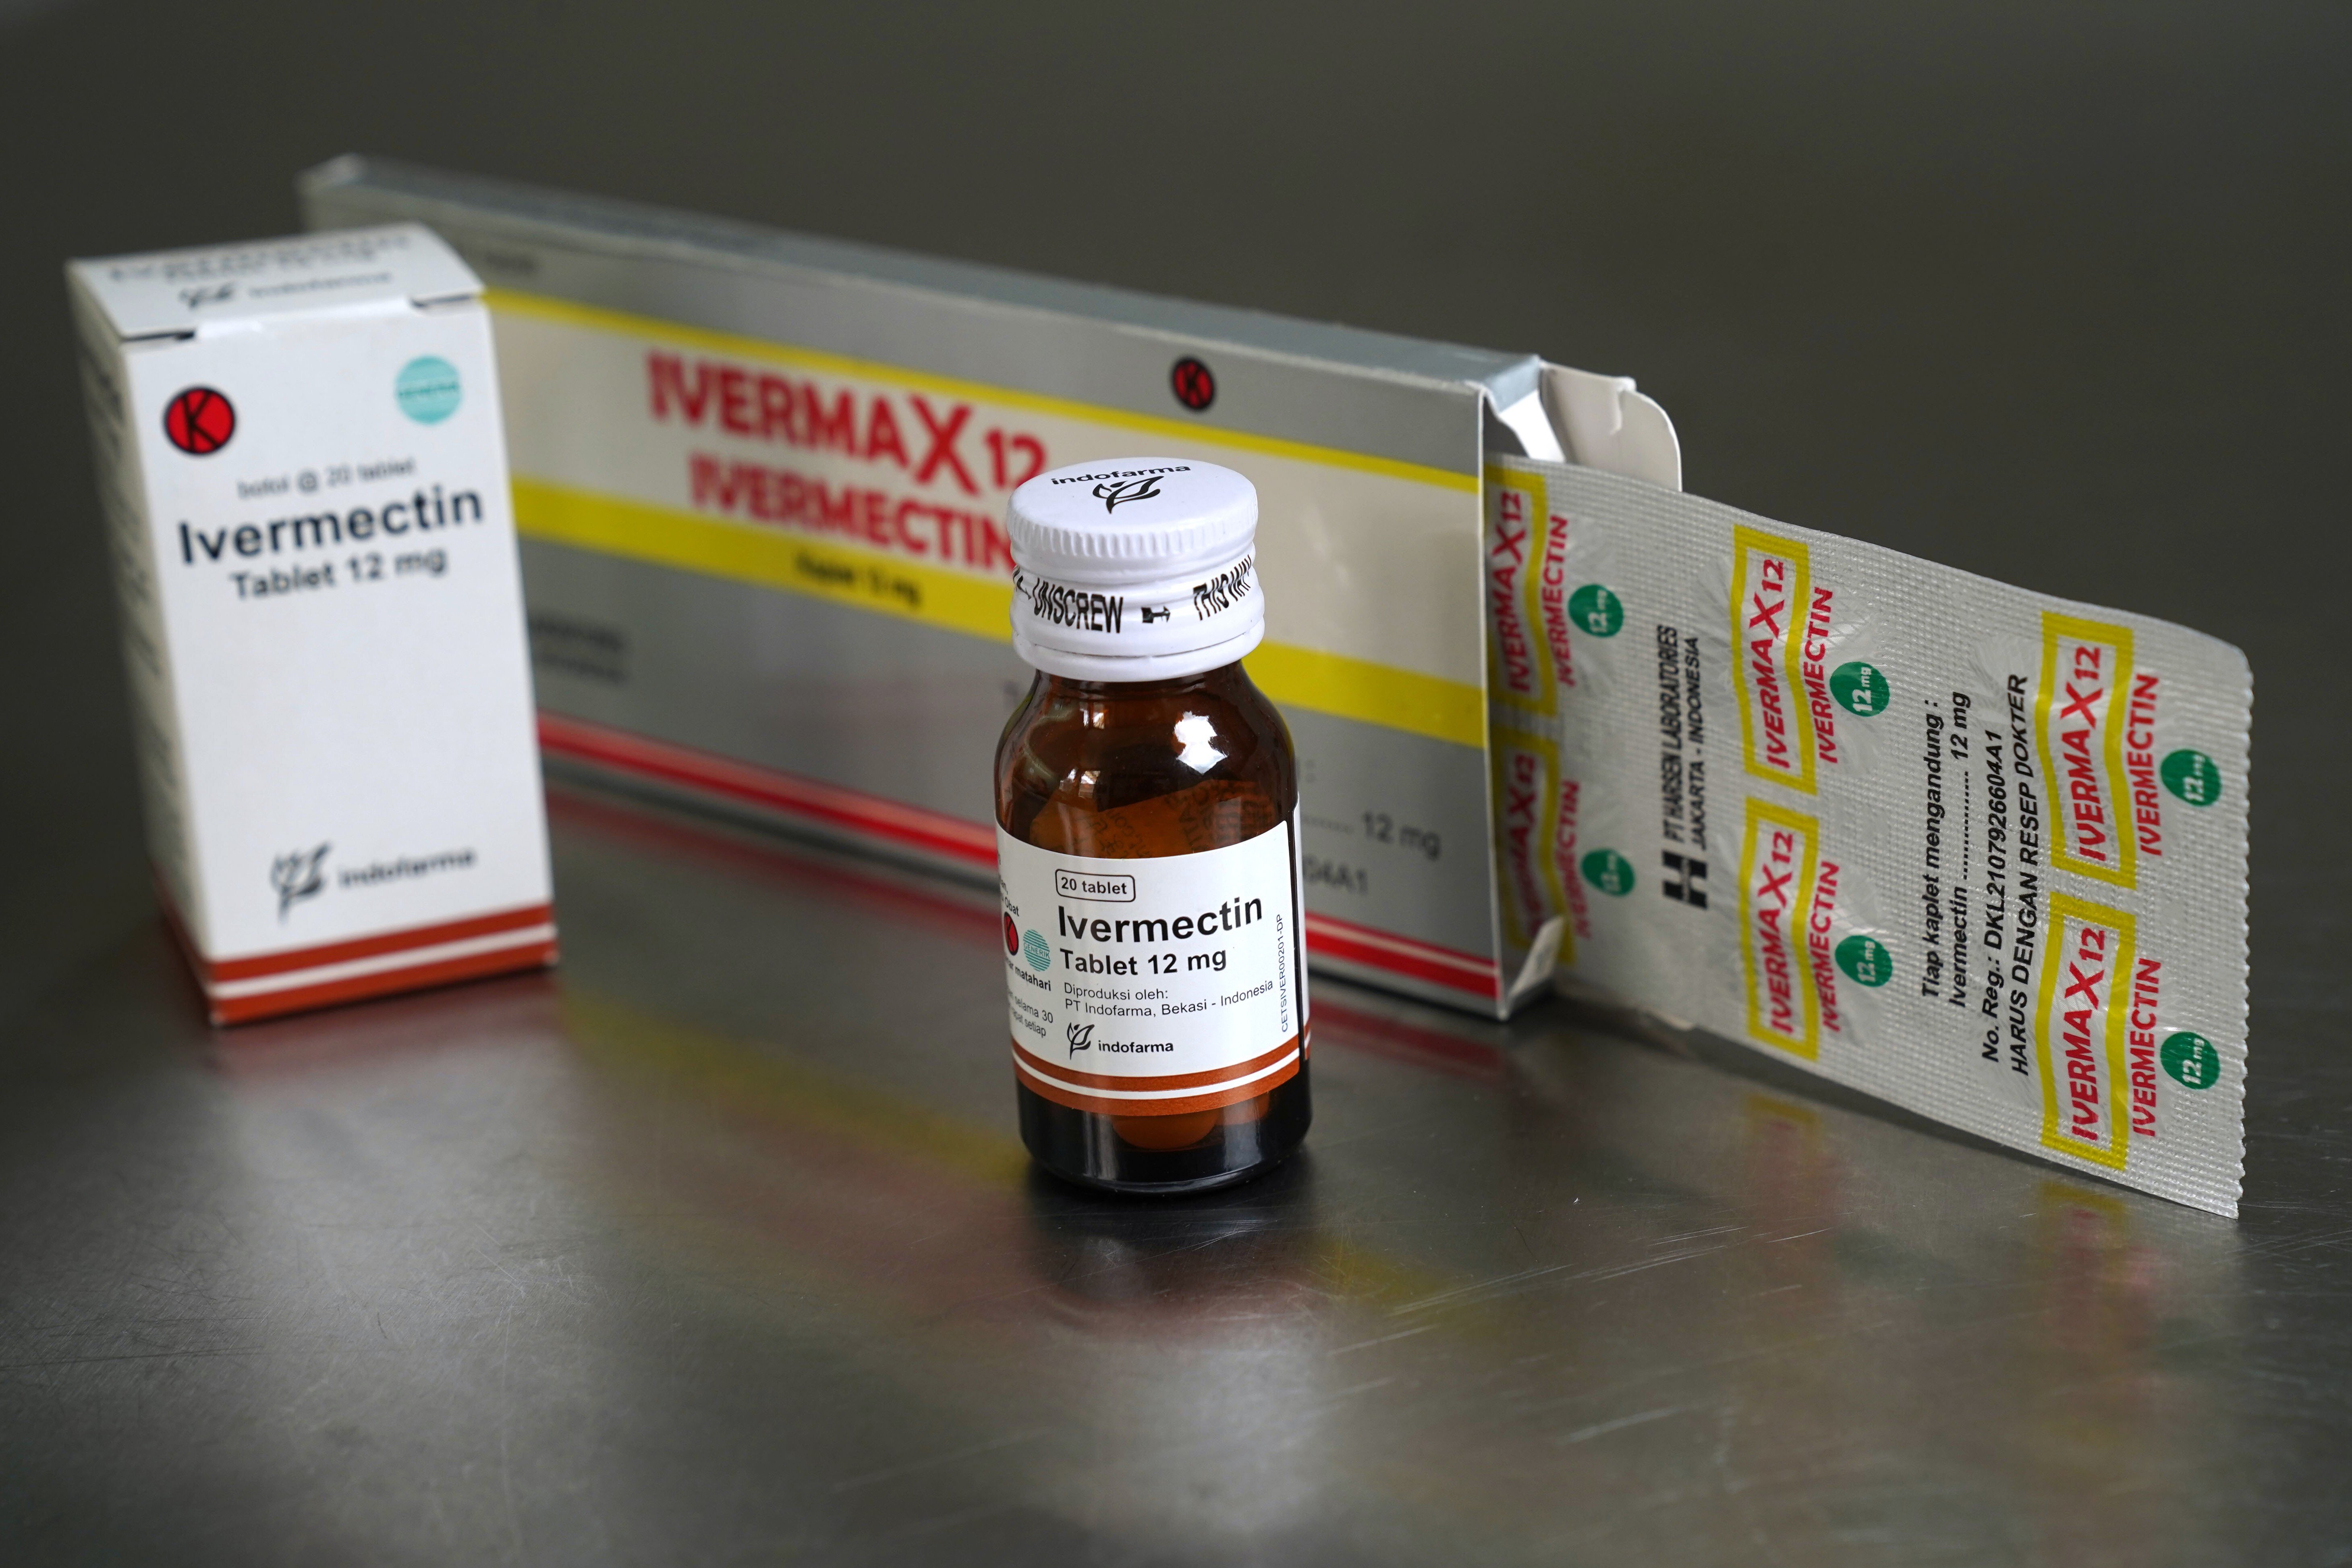 Ivermectin tablets pictured in Jakarta, Indonesia. Photo: Bloomberg